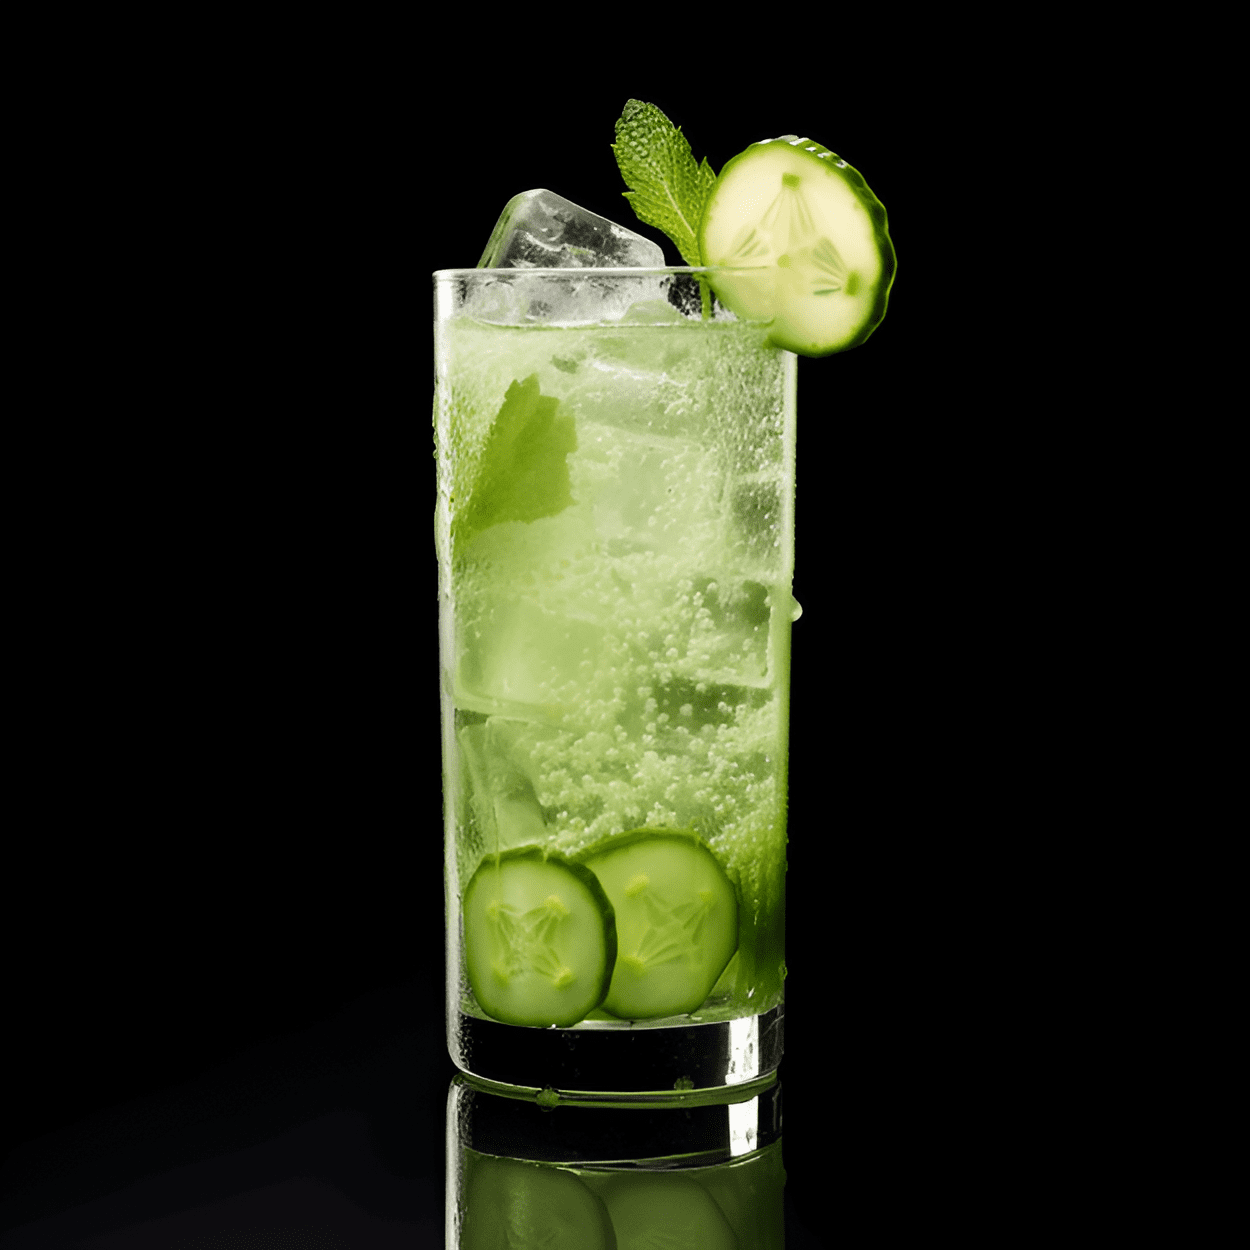 Cucumber Crush Cocktail Recipe - The Cucumber Crush is a light, refreshing cocktail with a crisp, clean taste. The cucumber gives it a fresh, vegetal flavor, while the lime adds a tart, citrusy note. The vodka adds a bit of a kick, but it's not too strong. It's a well-balanced cocktail that is both sweet and sour, with a hint of bitterness from the lime.